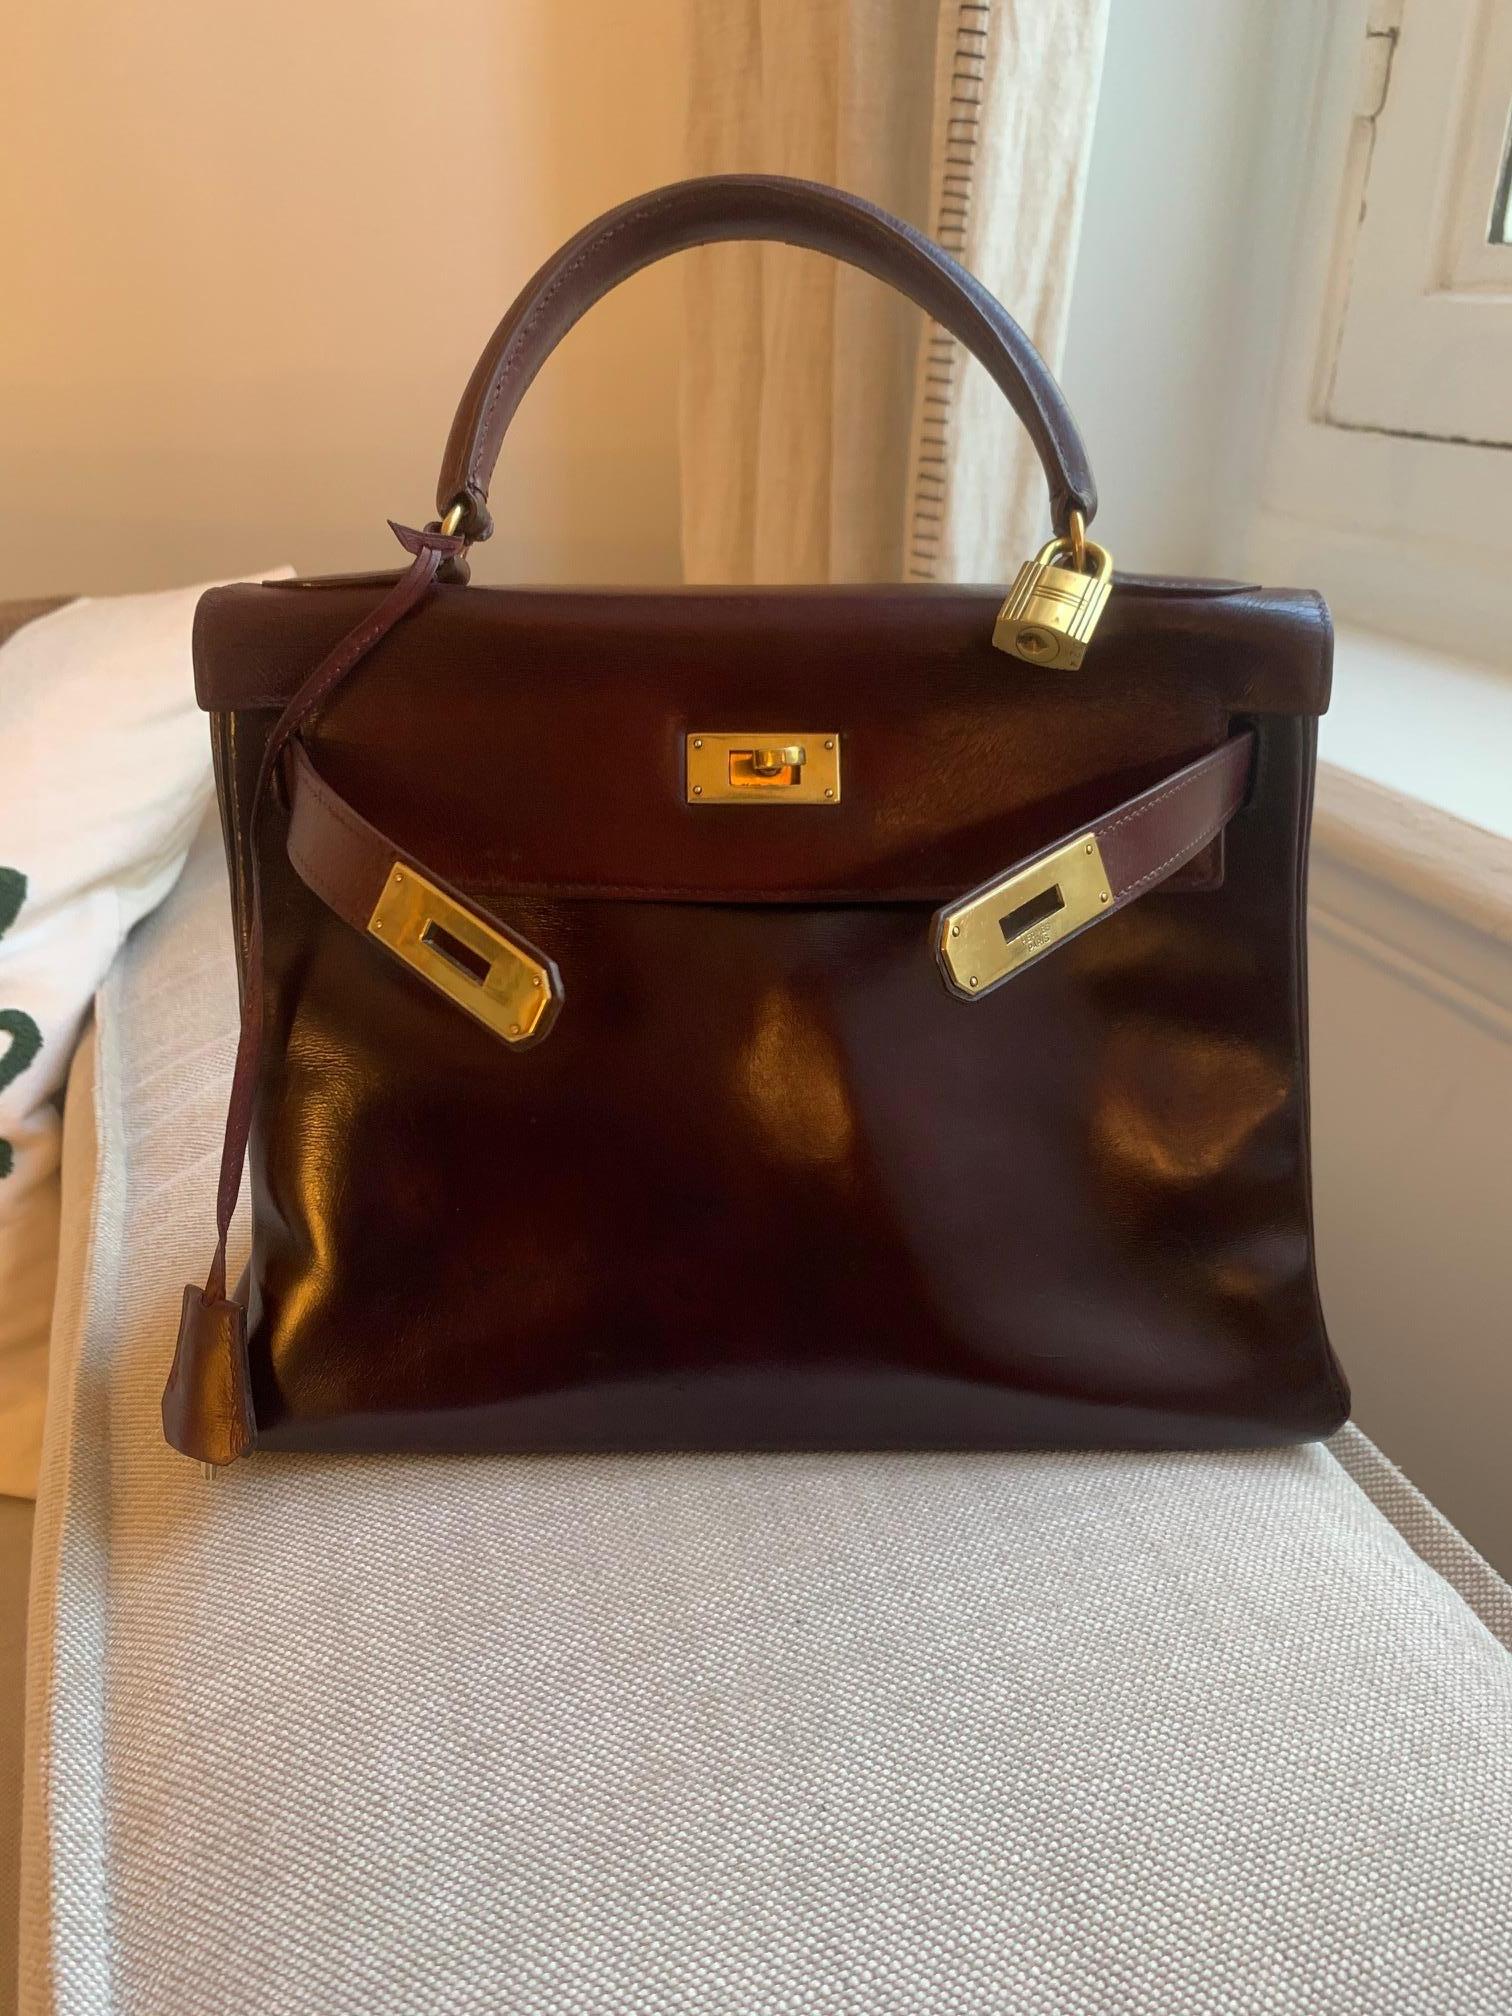 Beautiful VINTAGE Hermes Kelly 28 cm from 60's. 
Burgundy calfskin handbag, gold plated metal hardware, burgundy leather handle for carrying.

Closure by flap.
Lining in burgundy leather, one zippered pocket, two patch pockets.
Signature: 